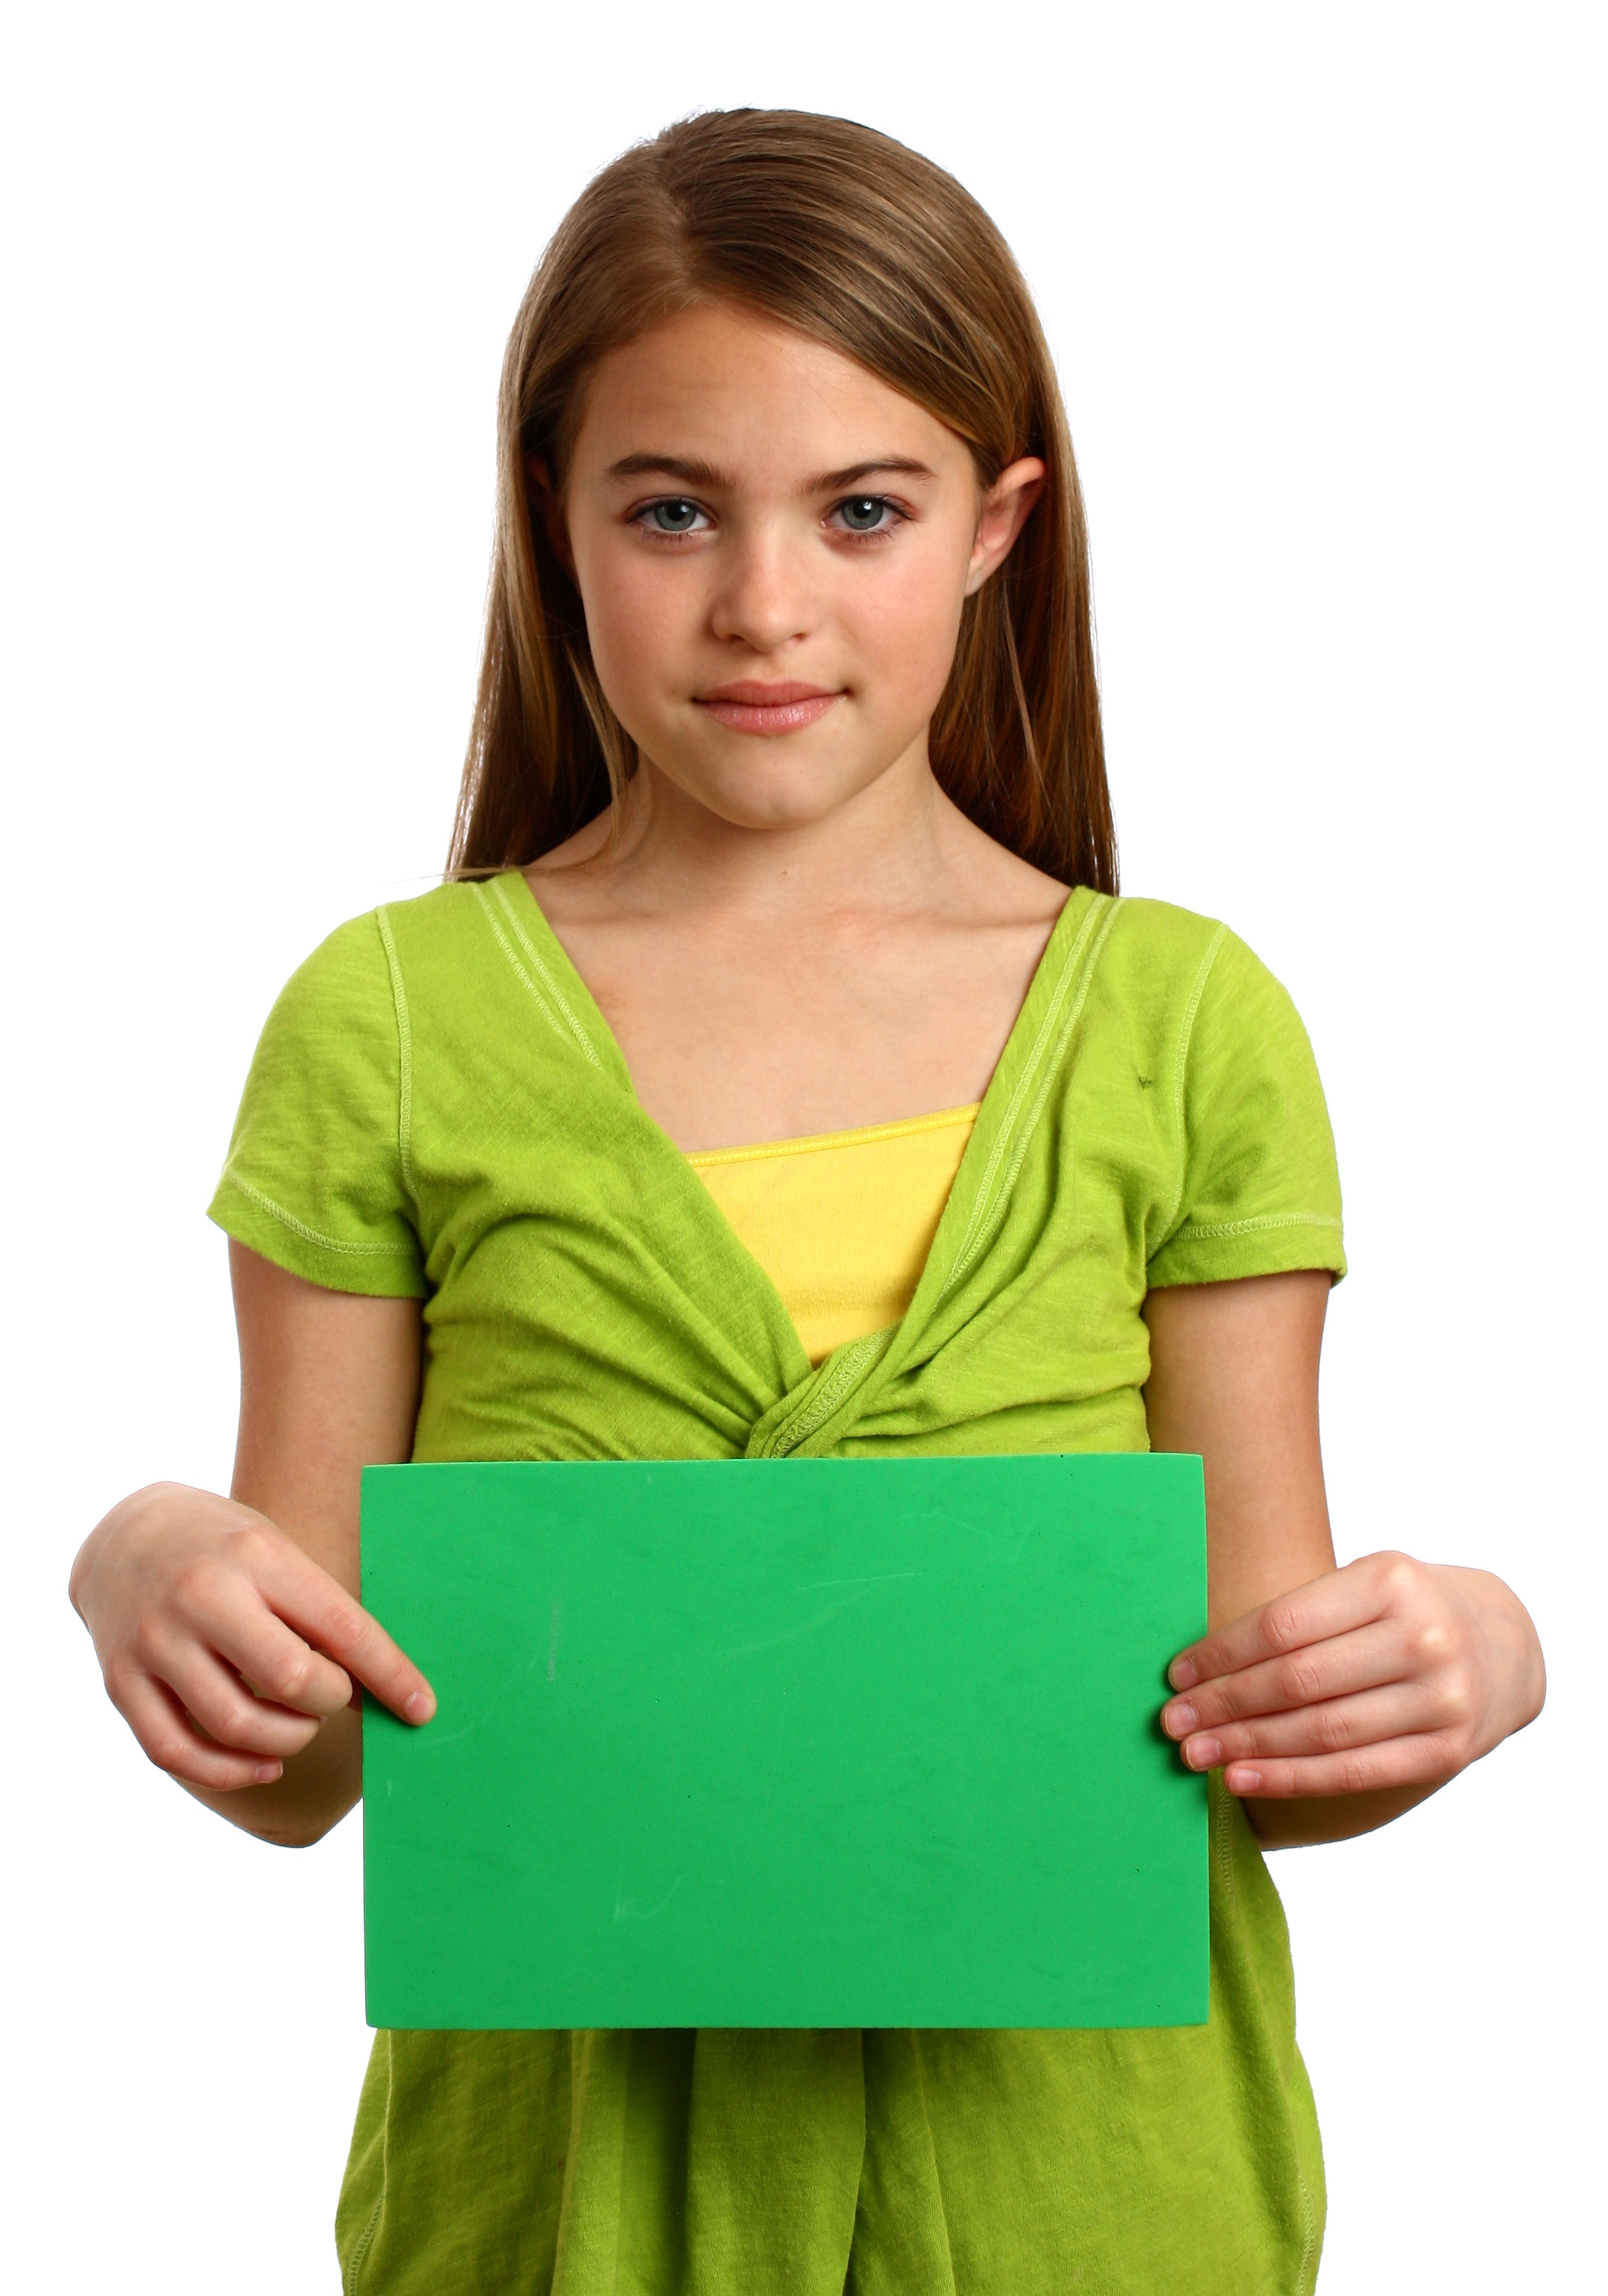 A young girl holding a blank sign, Beautiful, Objects, Tweens, Teens, HQ Photo